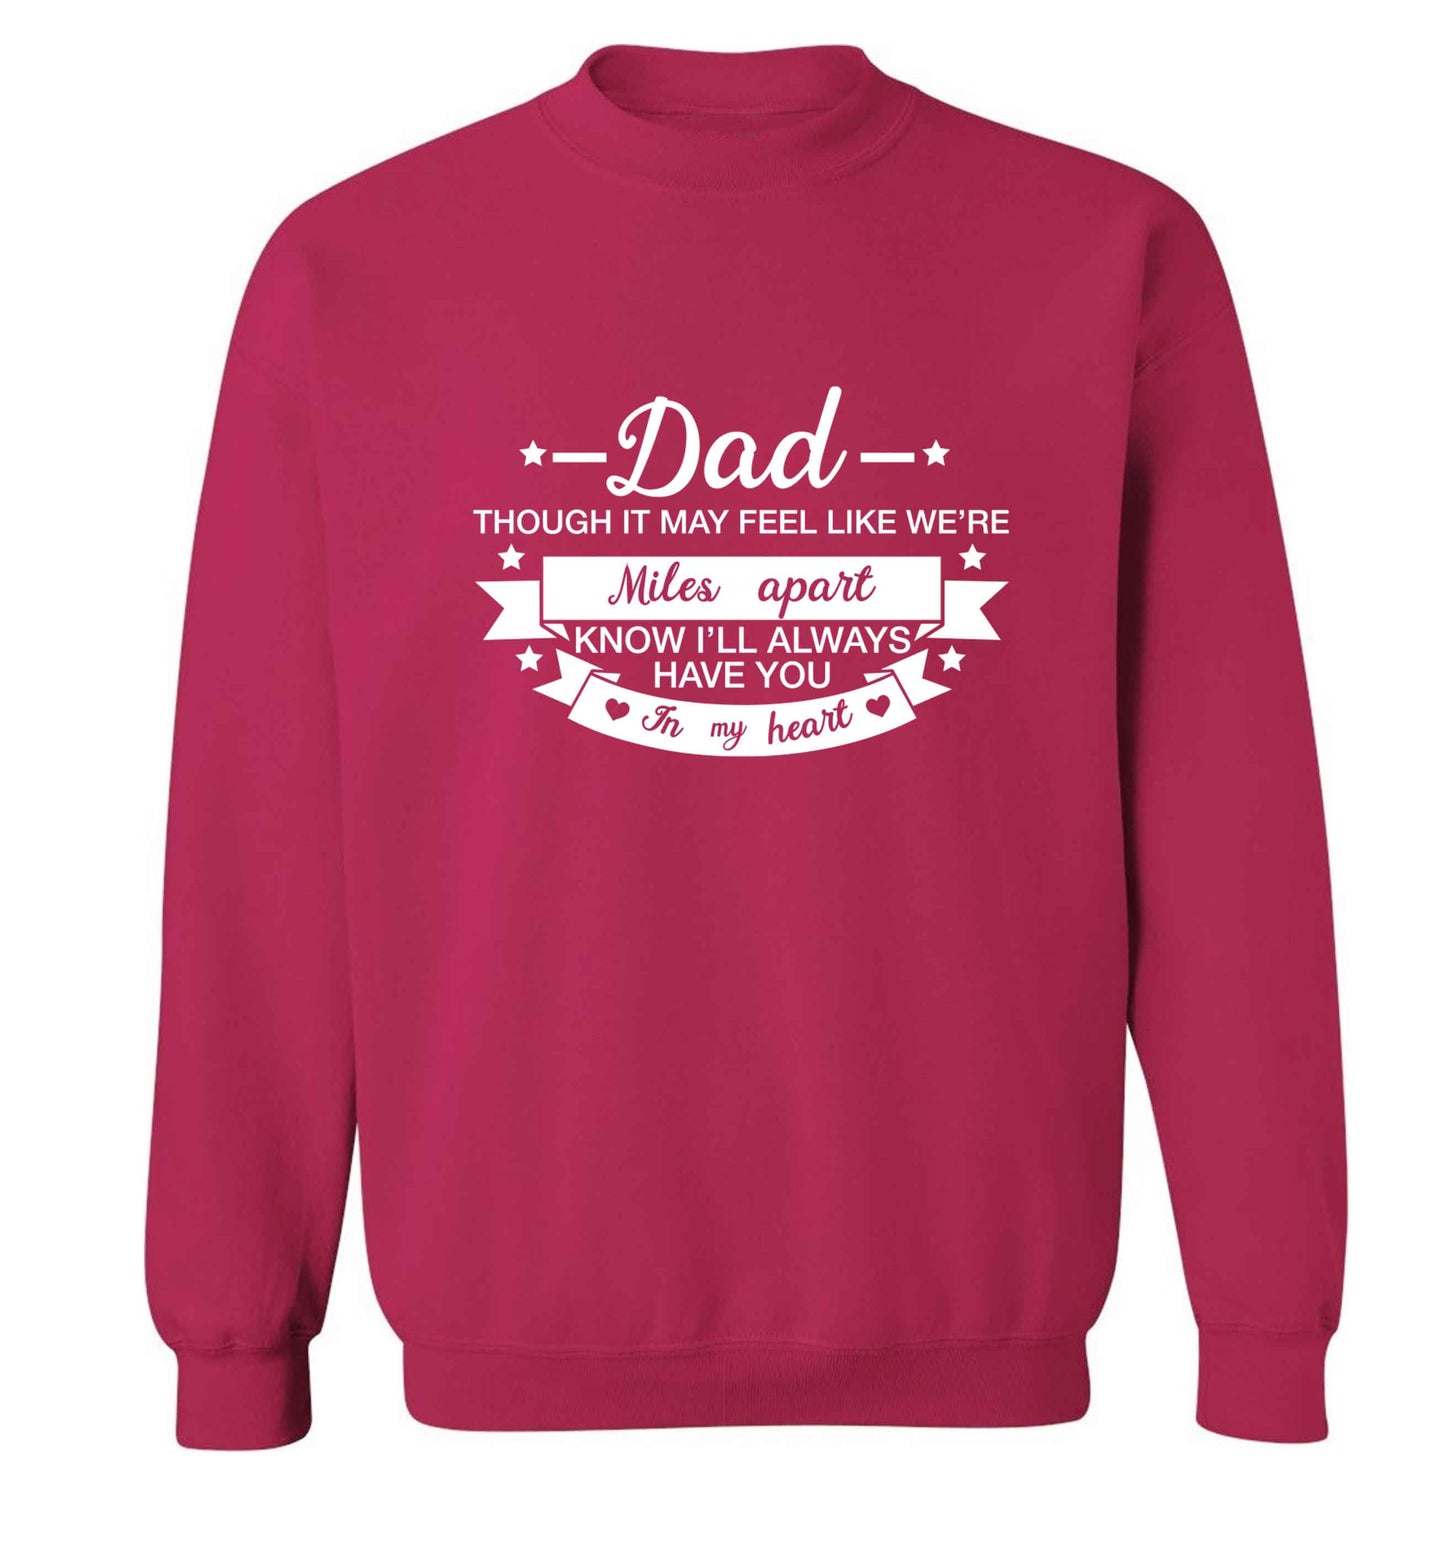 Dad though it may feel like we're miles apart know I'll always have you in my heart adult's unisex pink sweater 2XL